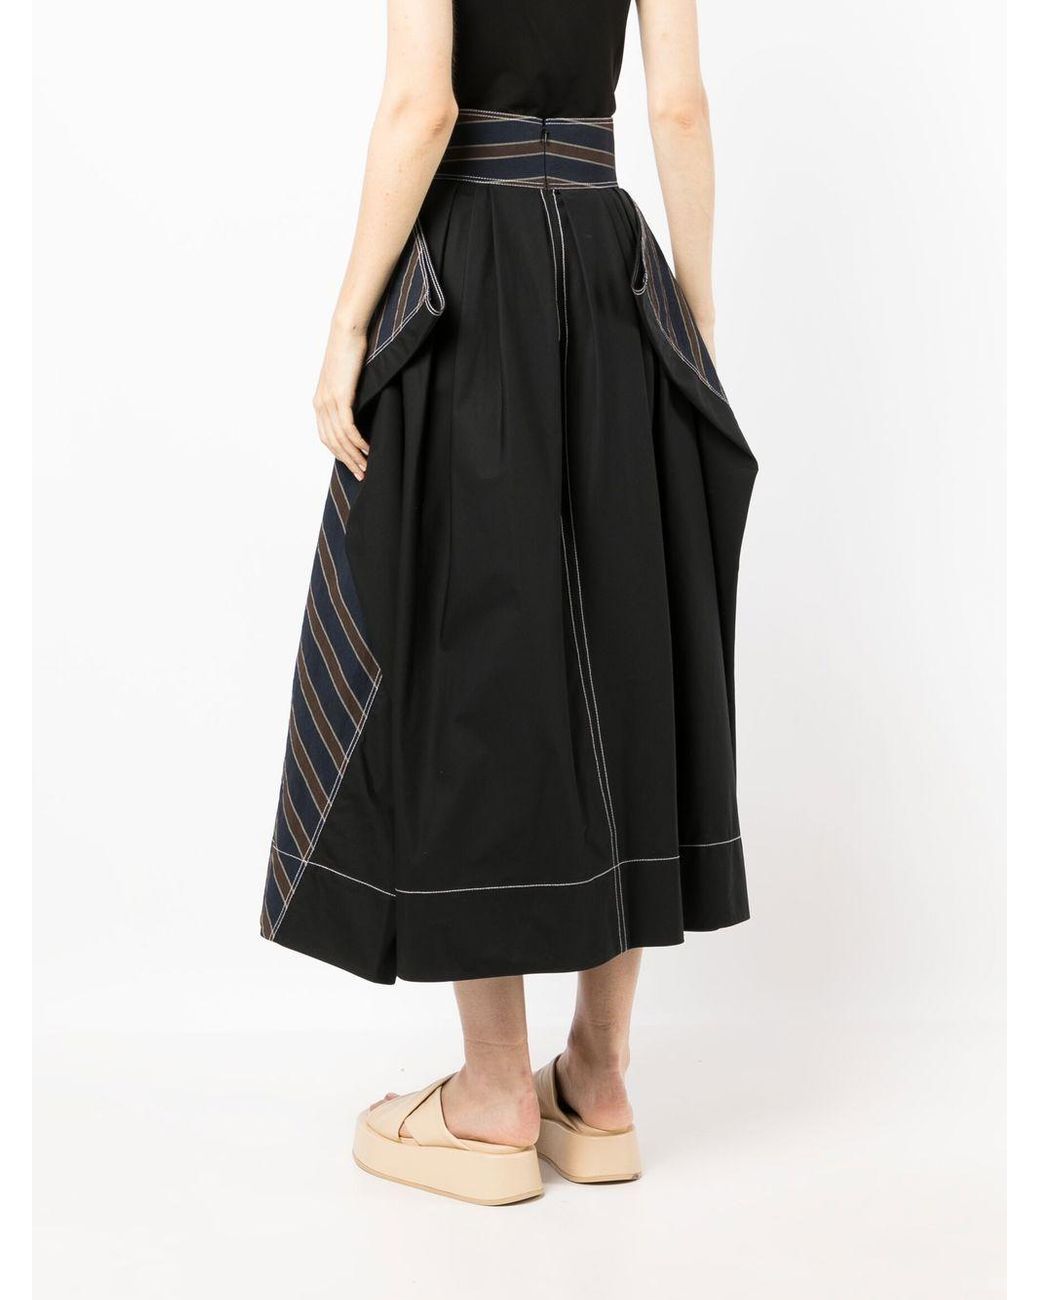 Tory Burch Striped Flared Skirt in Black | Lyst